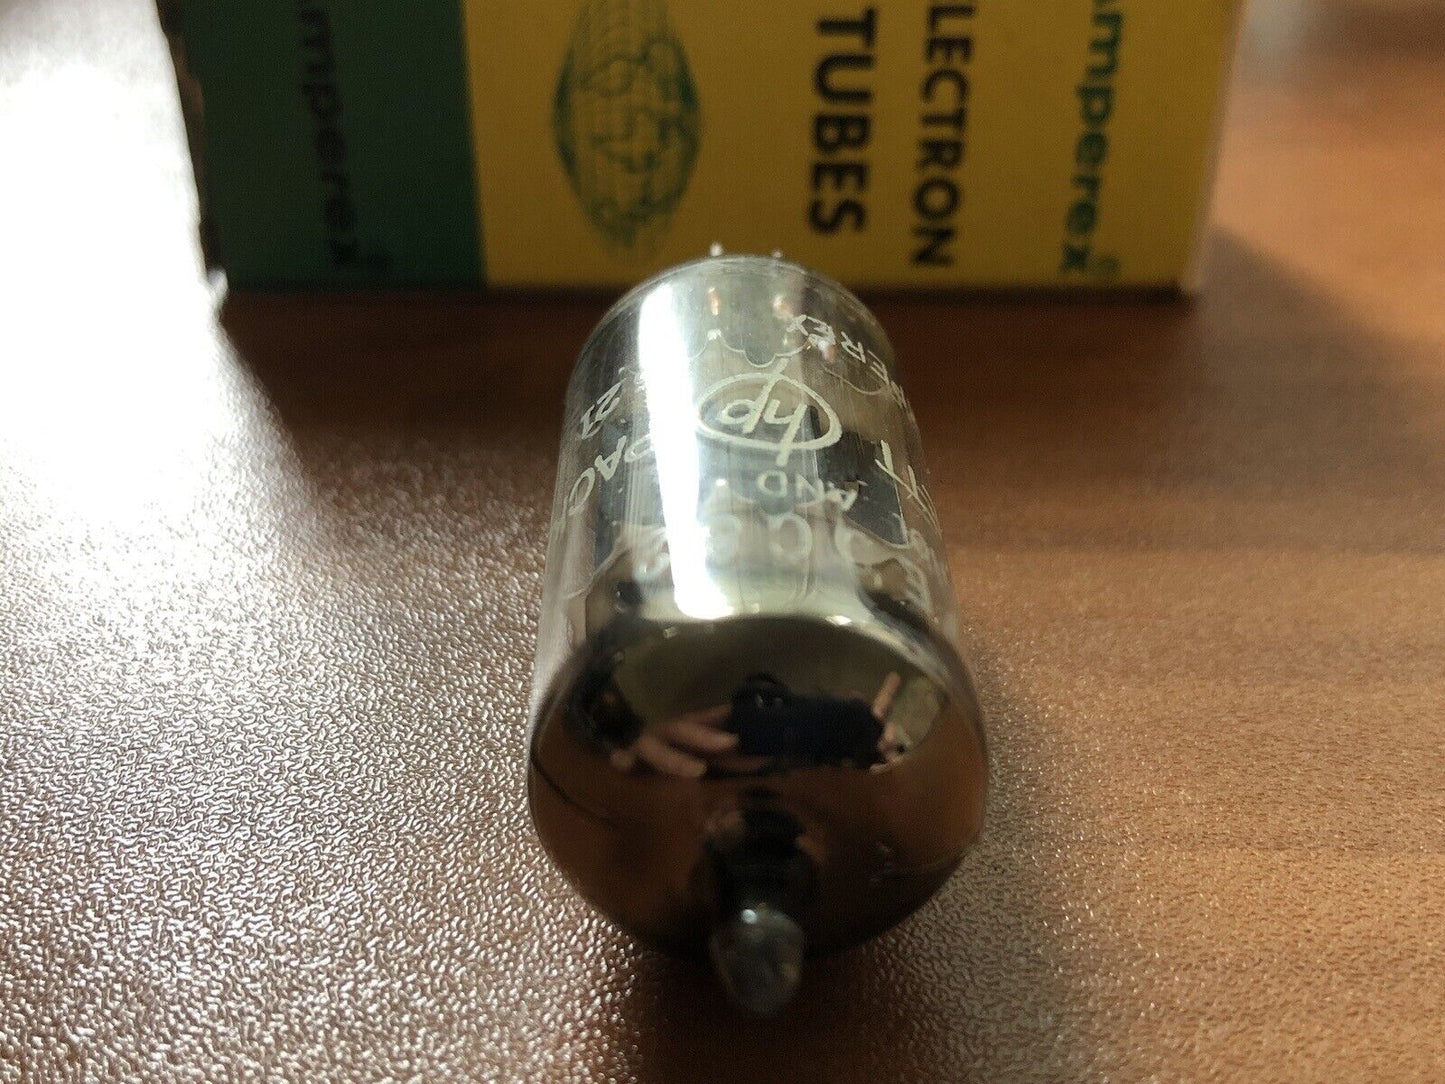 HP Select Amperex 12AU7 ECC82 Preamp Tube - Holland 1966 - Tests Strong